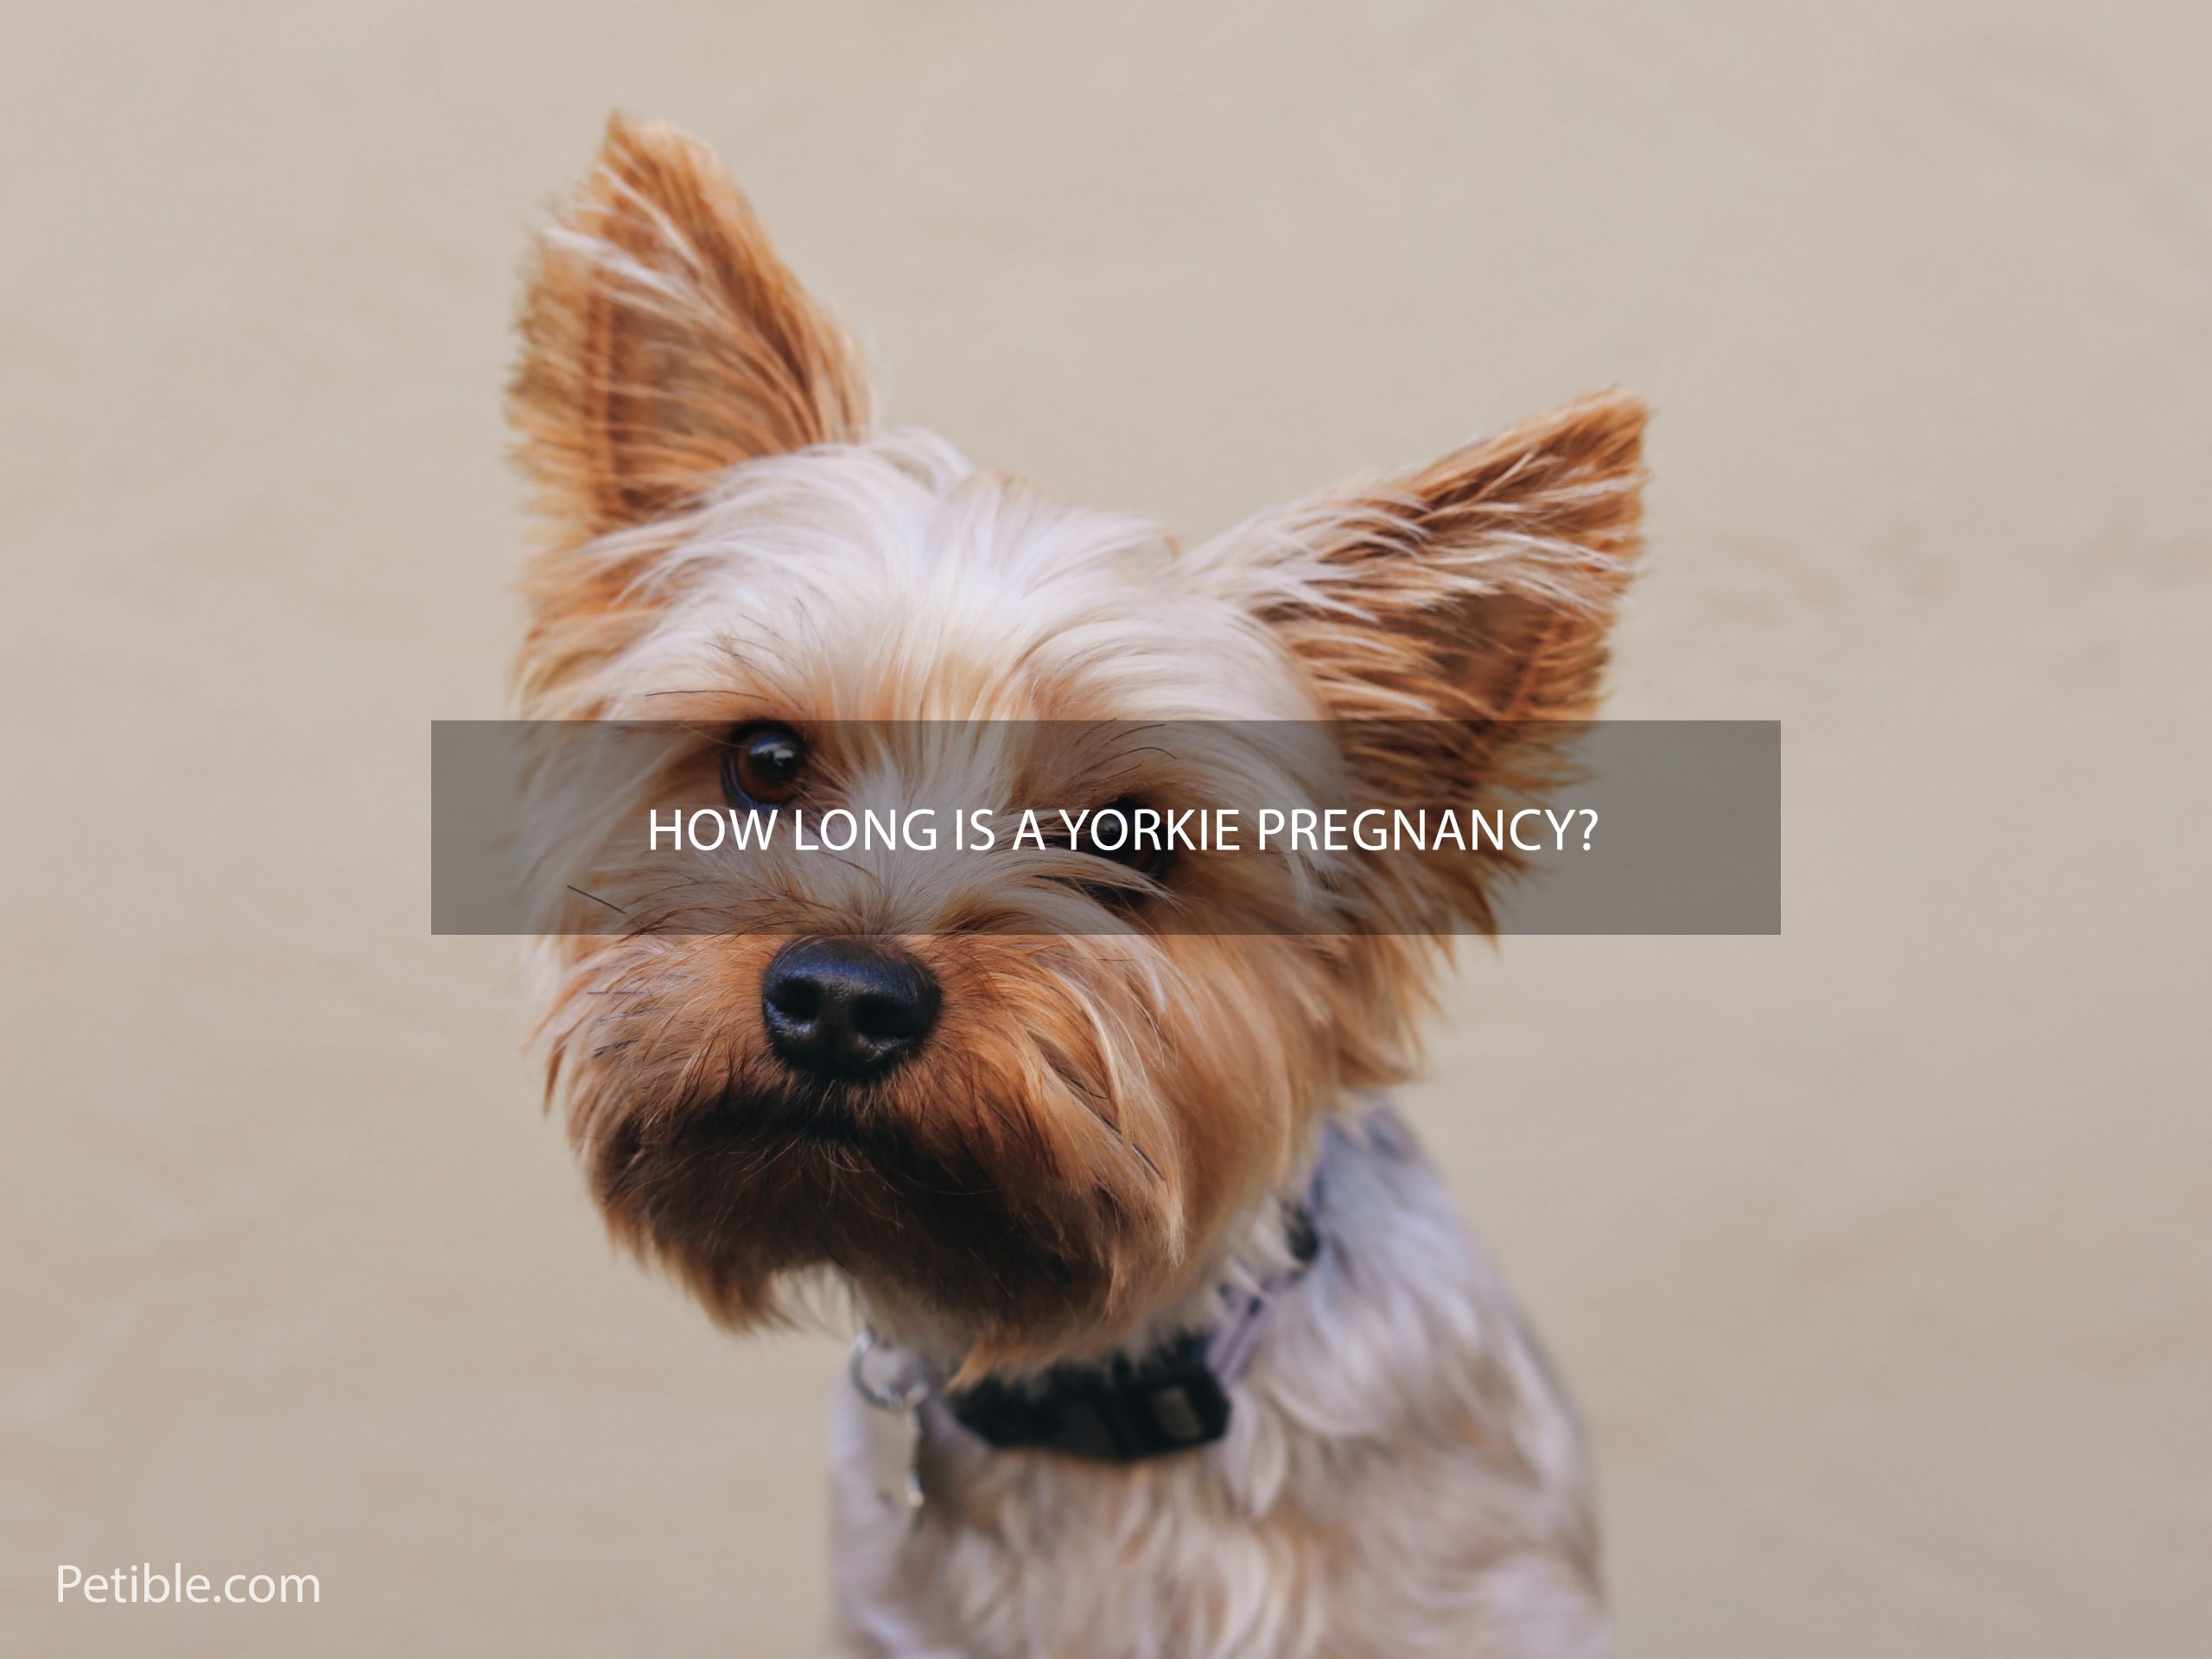 How long is a Yorkie pregnancy